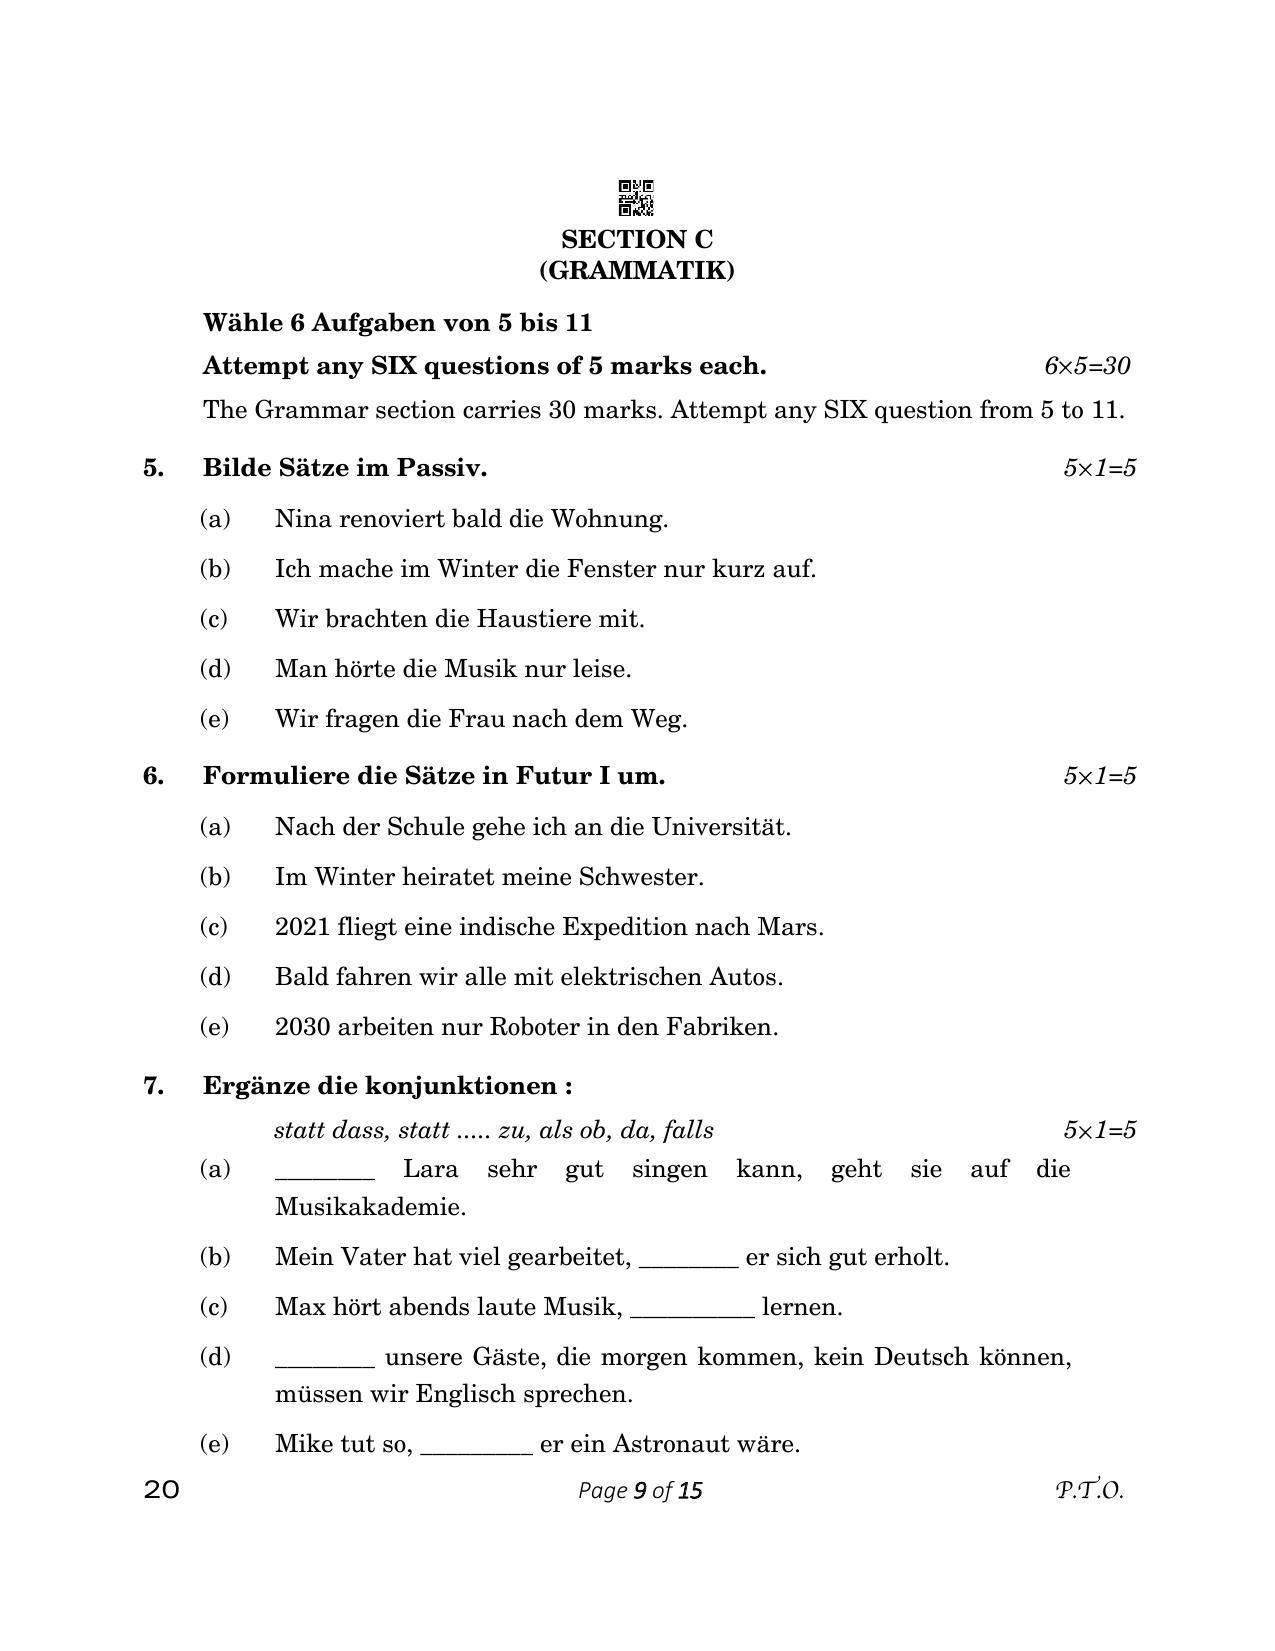 CBSE Class 12 20_German 2023 Question Paper - Page 9